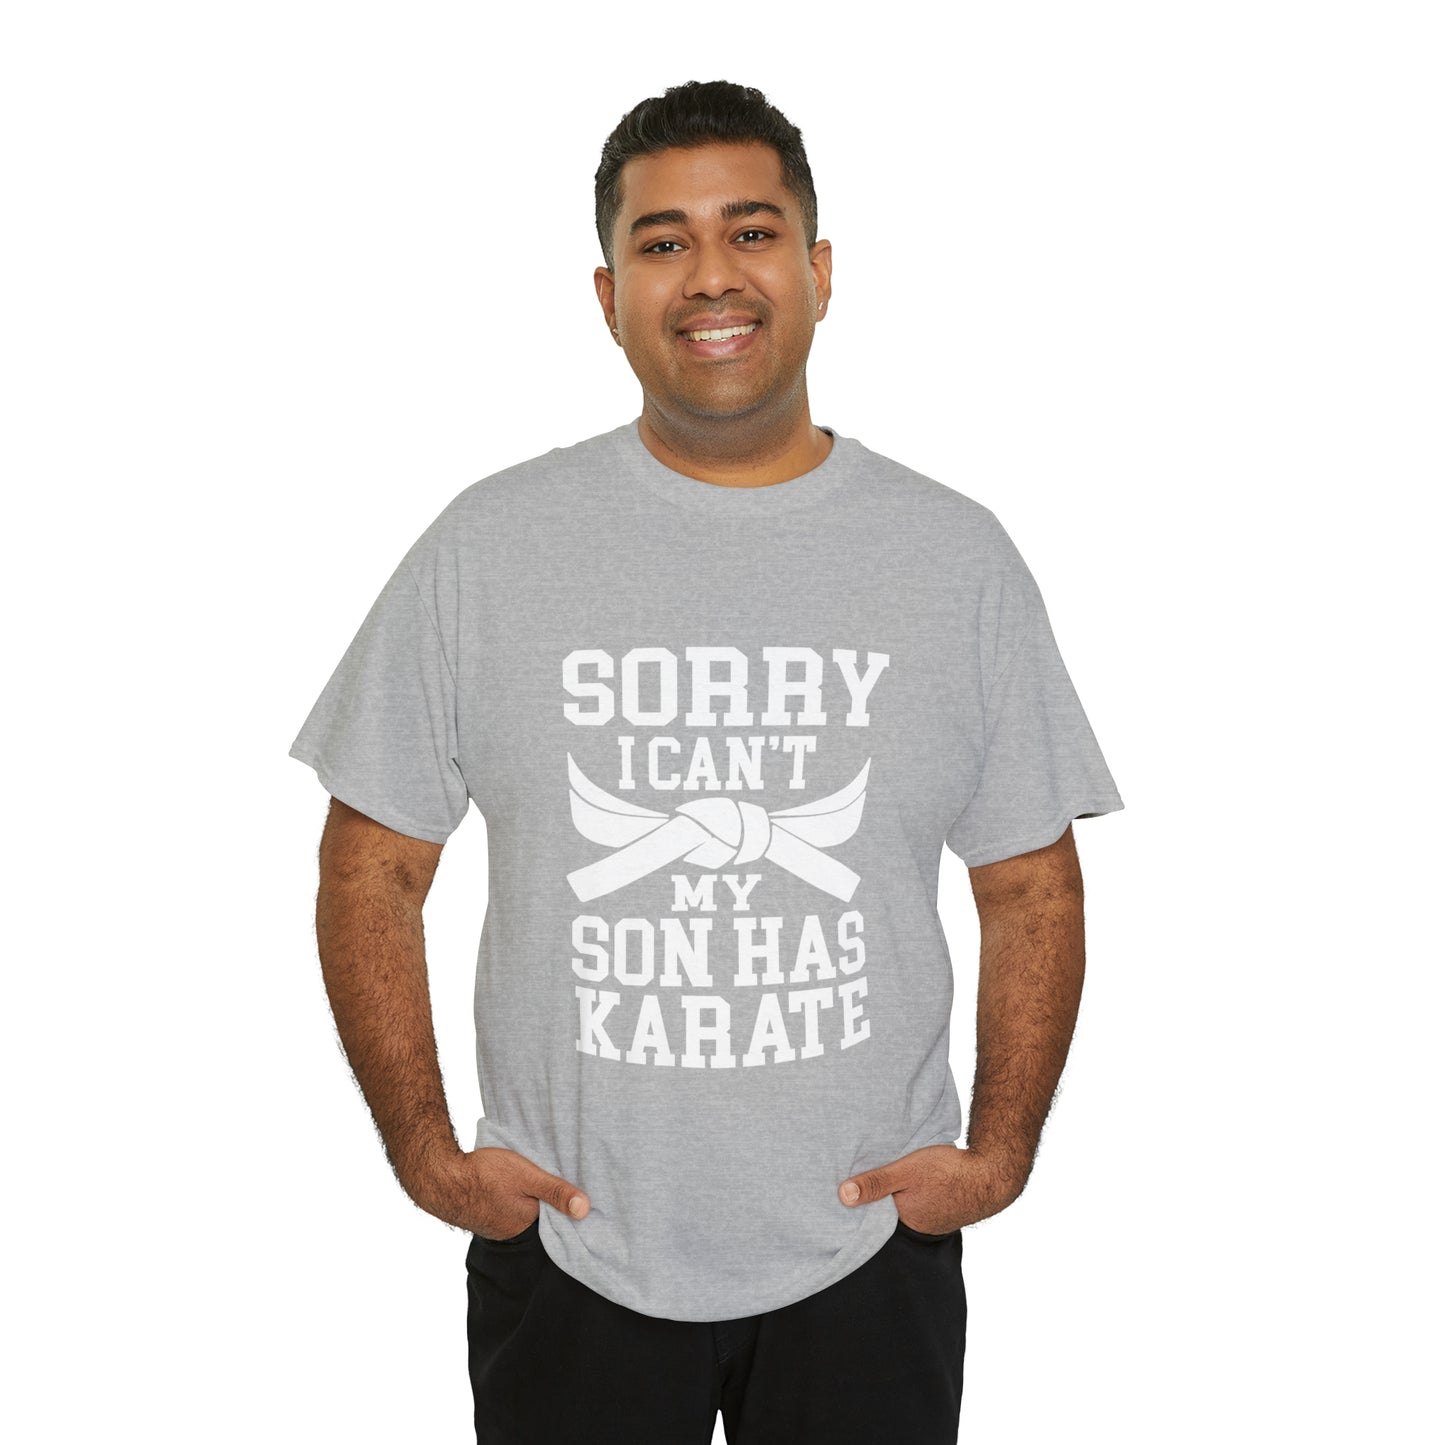 Sorry I Can't Karate Shirt, Shirt For Mom or Dad Heavy Cotton Tee